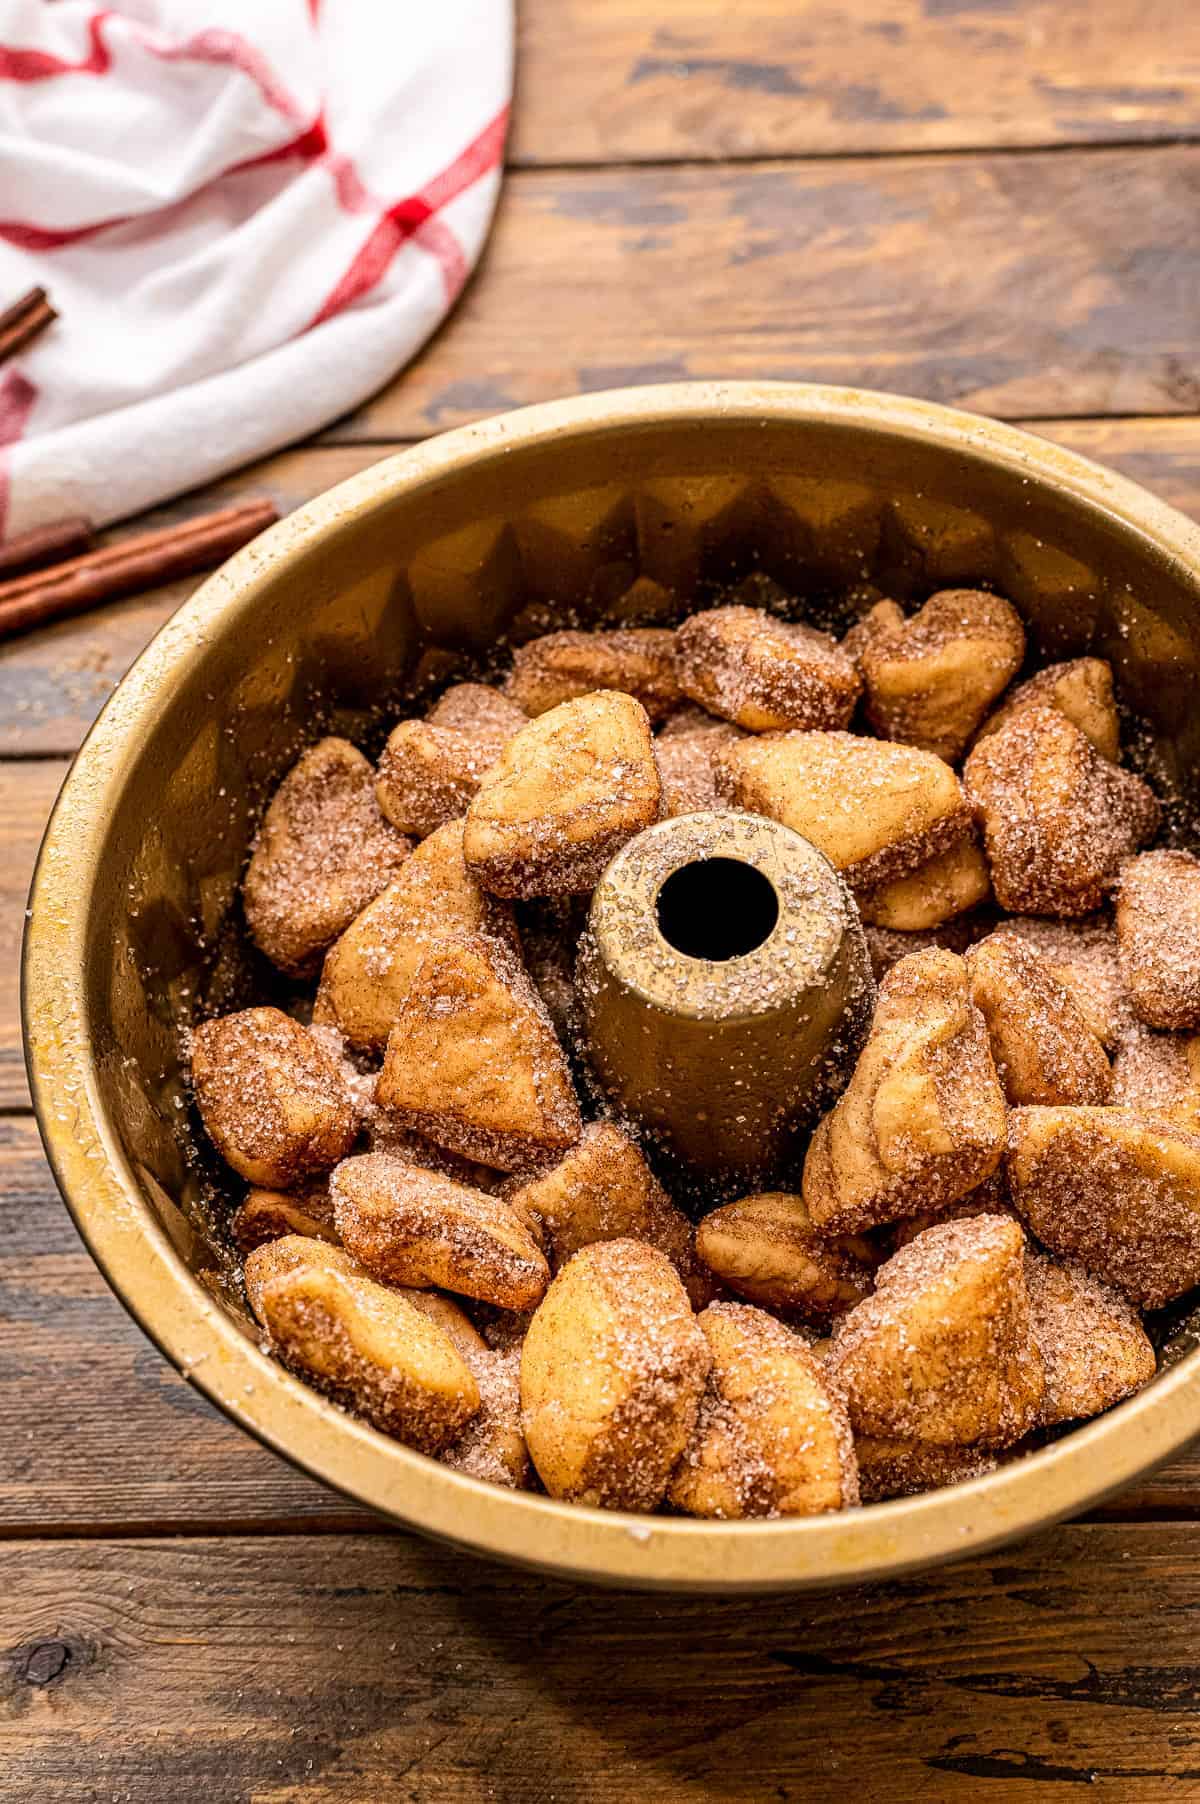 Bundt pan with cinnamon sugar biscuits in it for monkey bread